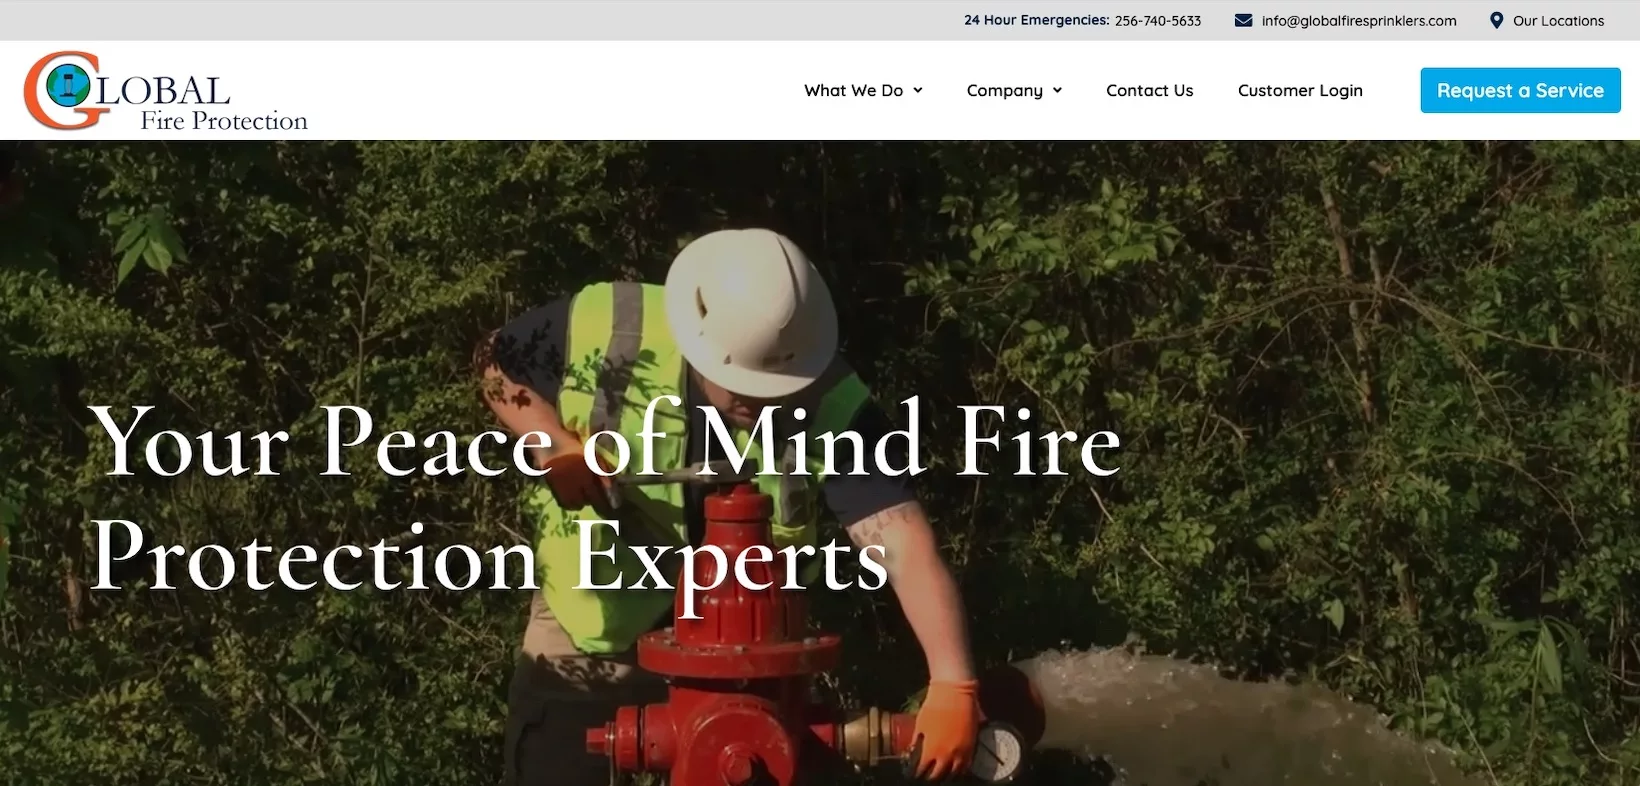 Featured image for “Global Fire Sprinklers”